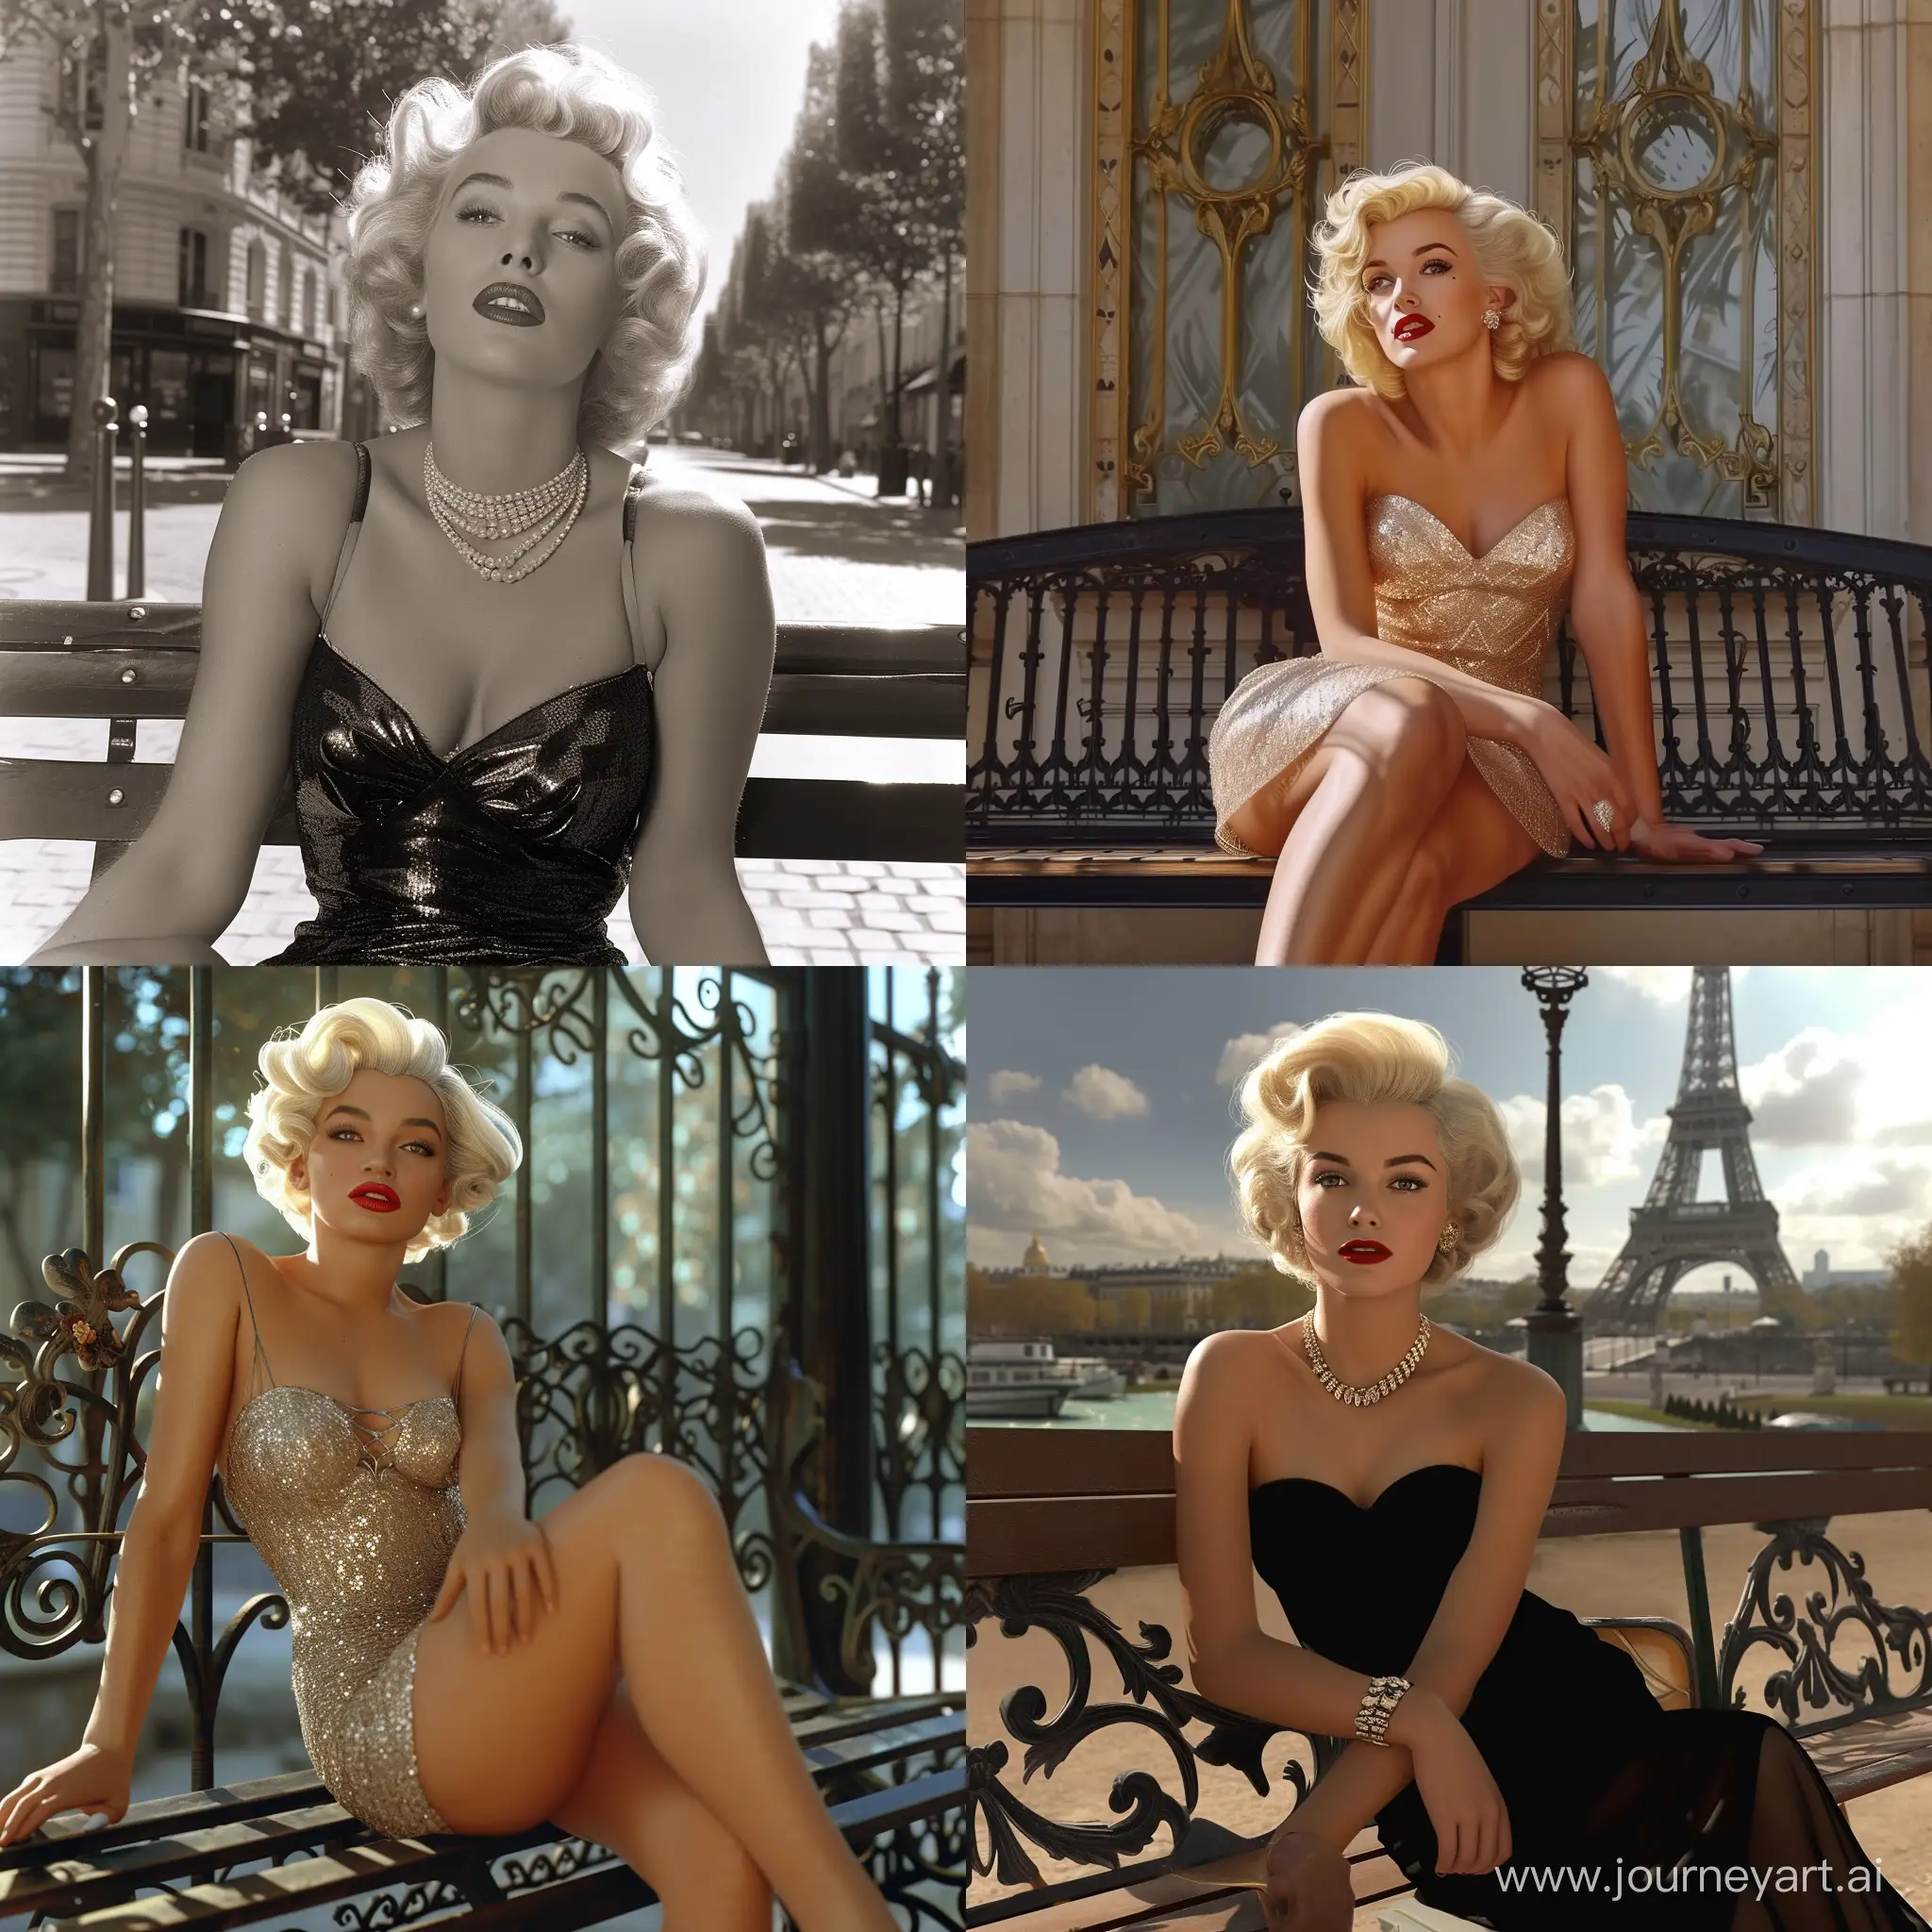 Marilyn-Monroe-Sitting-on-a-Parisian-Bench-in-Realistic-1950s-Style